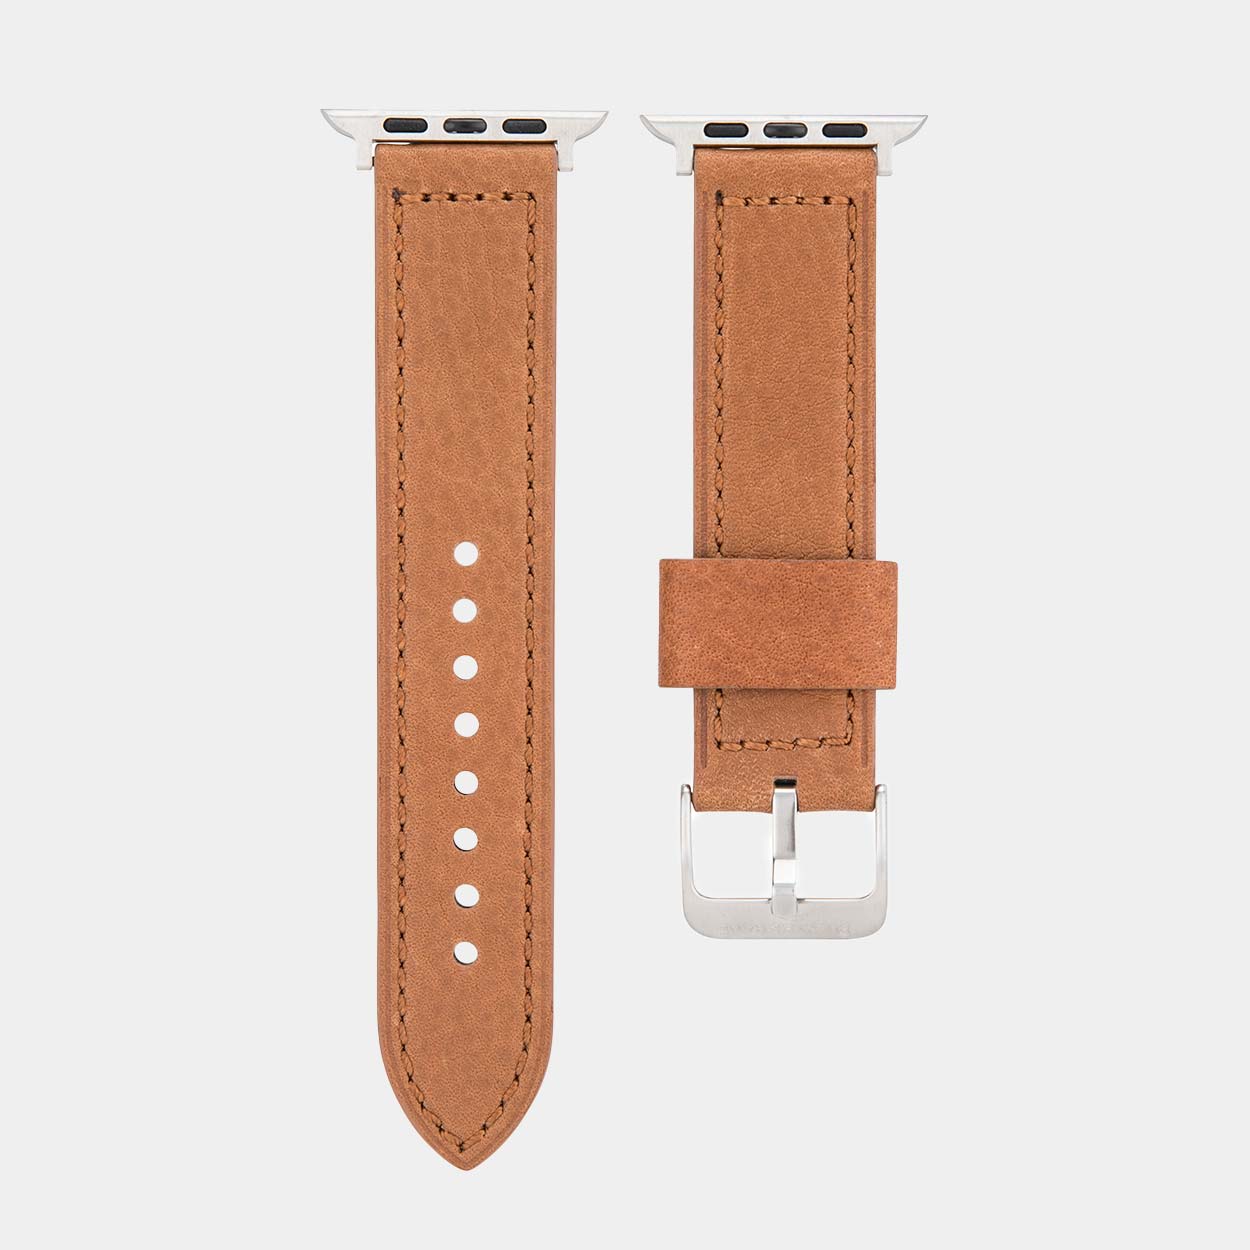 Lond luxury leather apple watch straps